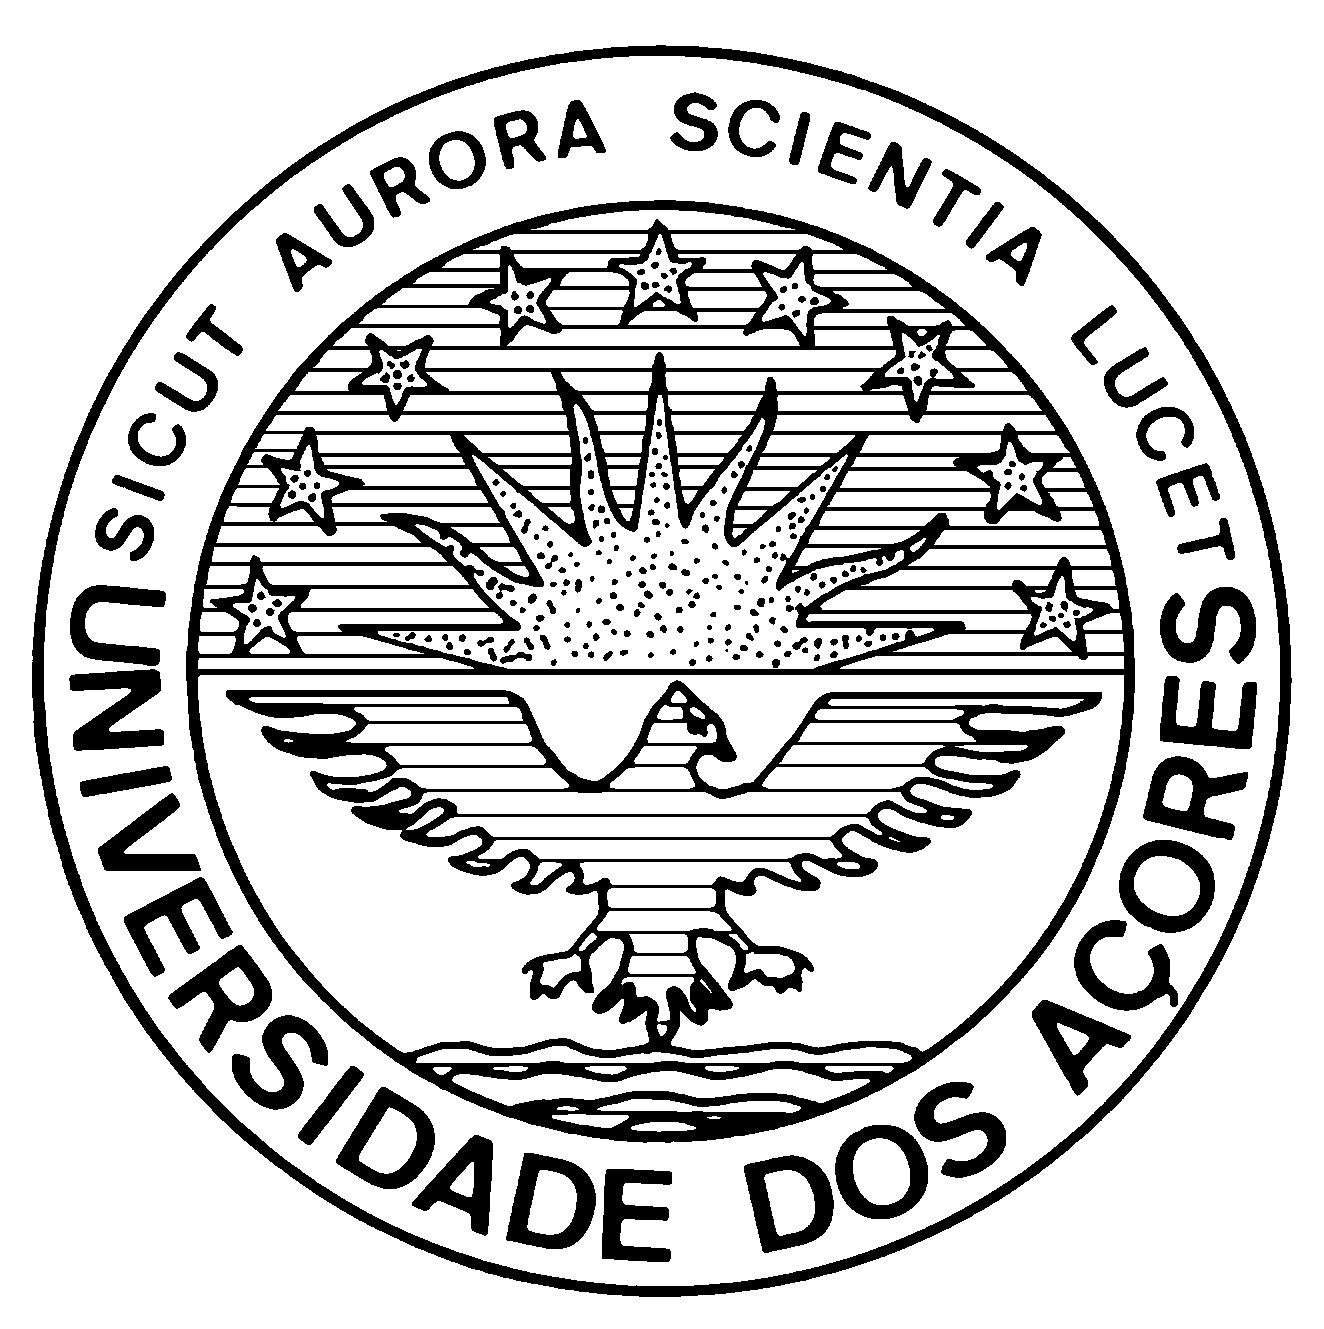 Azores Logo - University of the Azores Logo. Deep Carbon Observatory